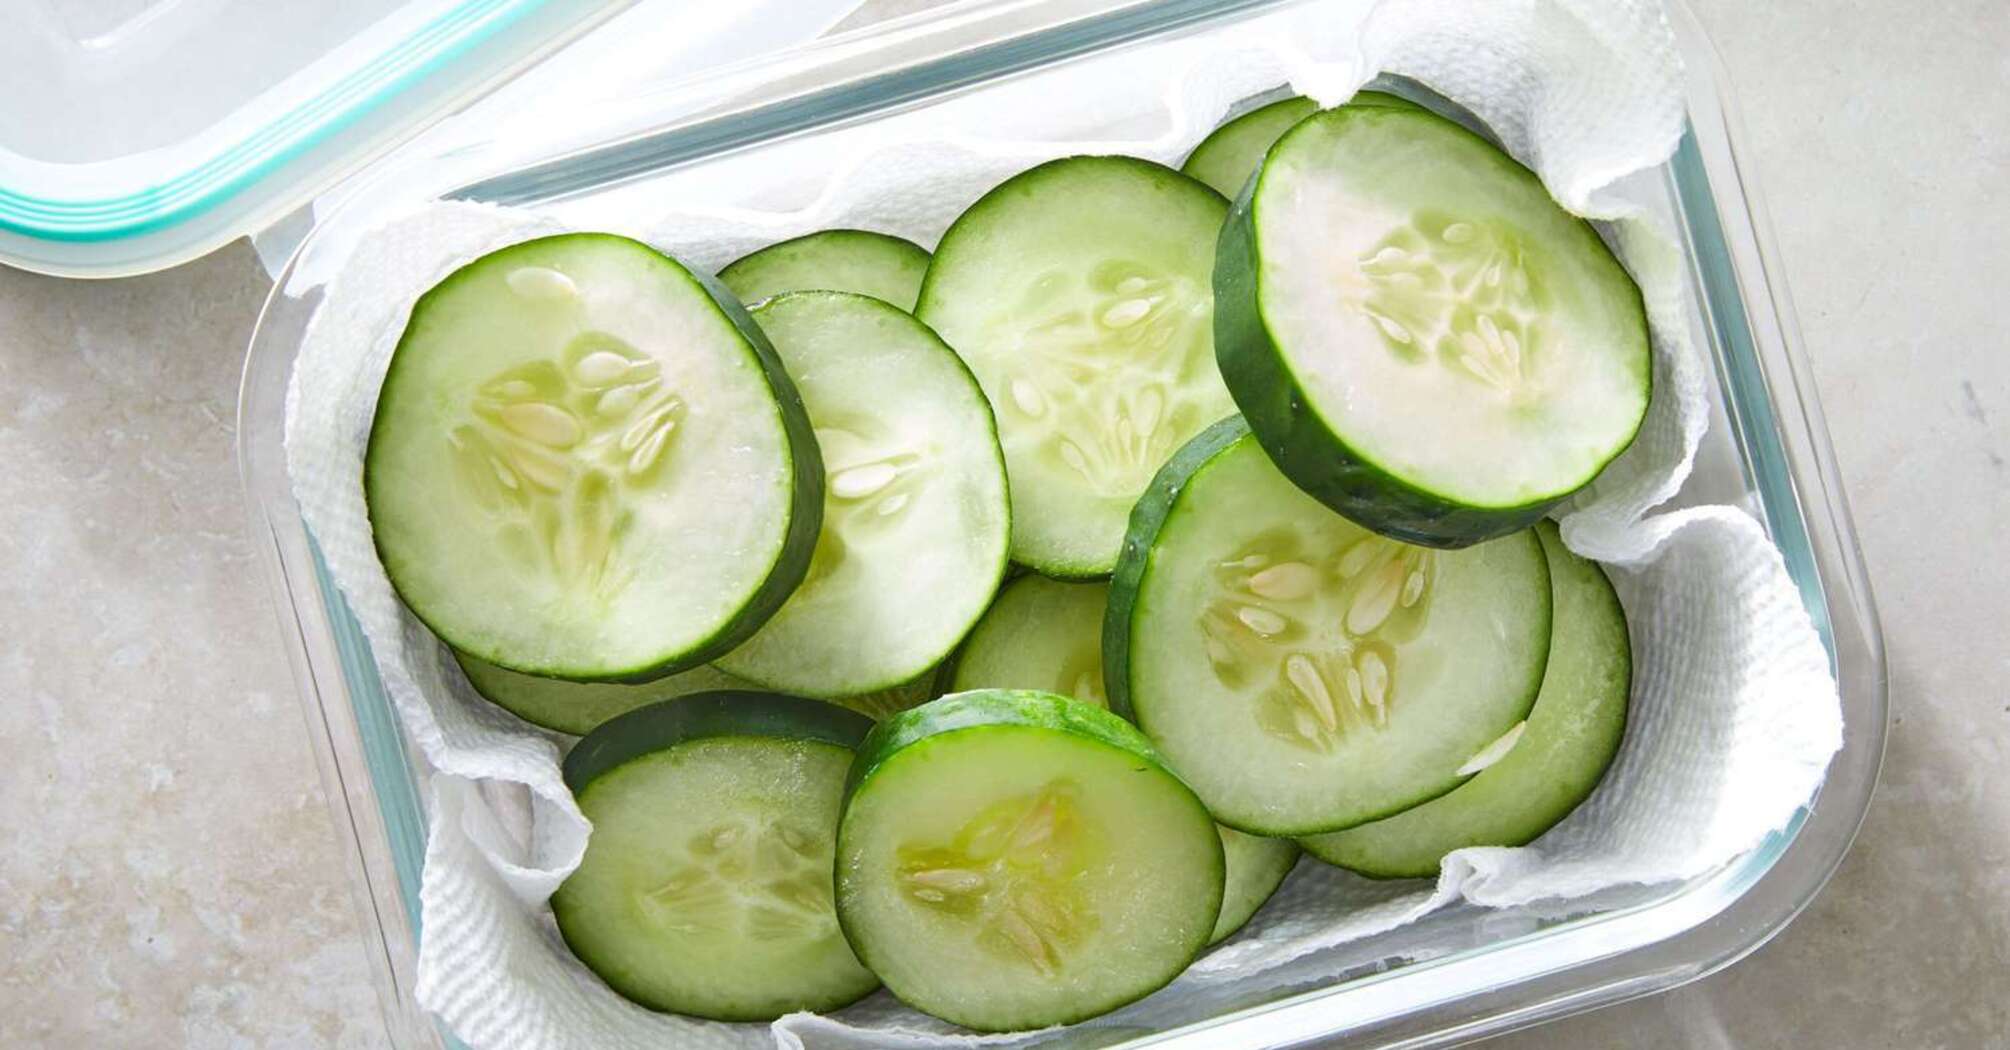 How to keep cucumbers fresh for a long time